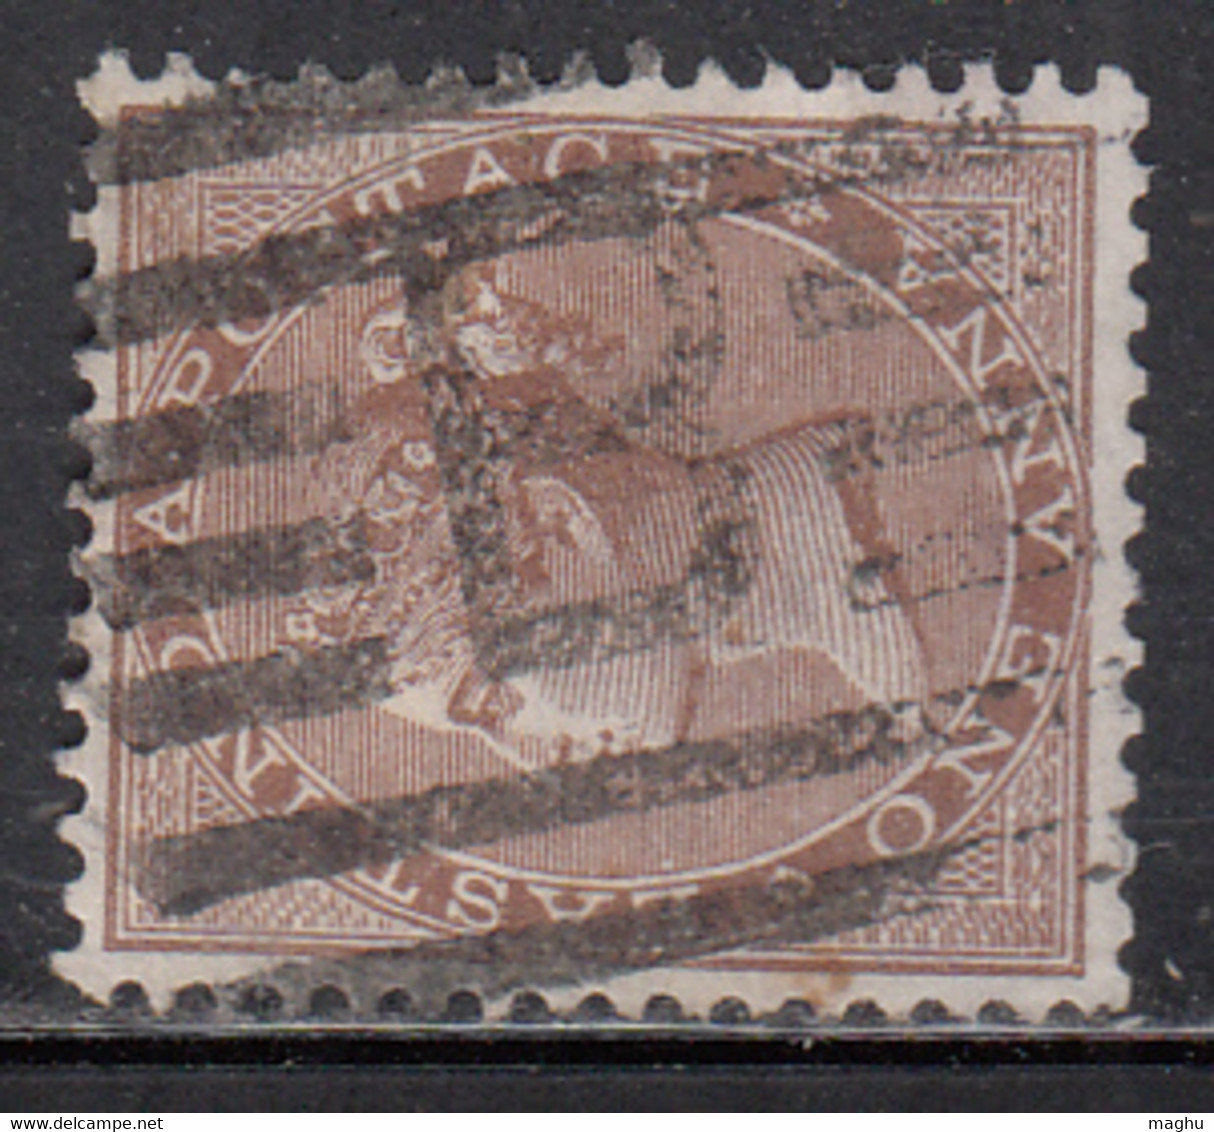 'B' Witin Rectangular Parallel Bars On One Anna 1865, British India Used, JC Type 34 - 1854 East India Company Administration